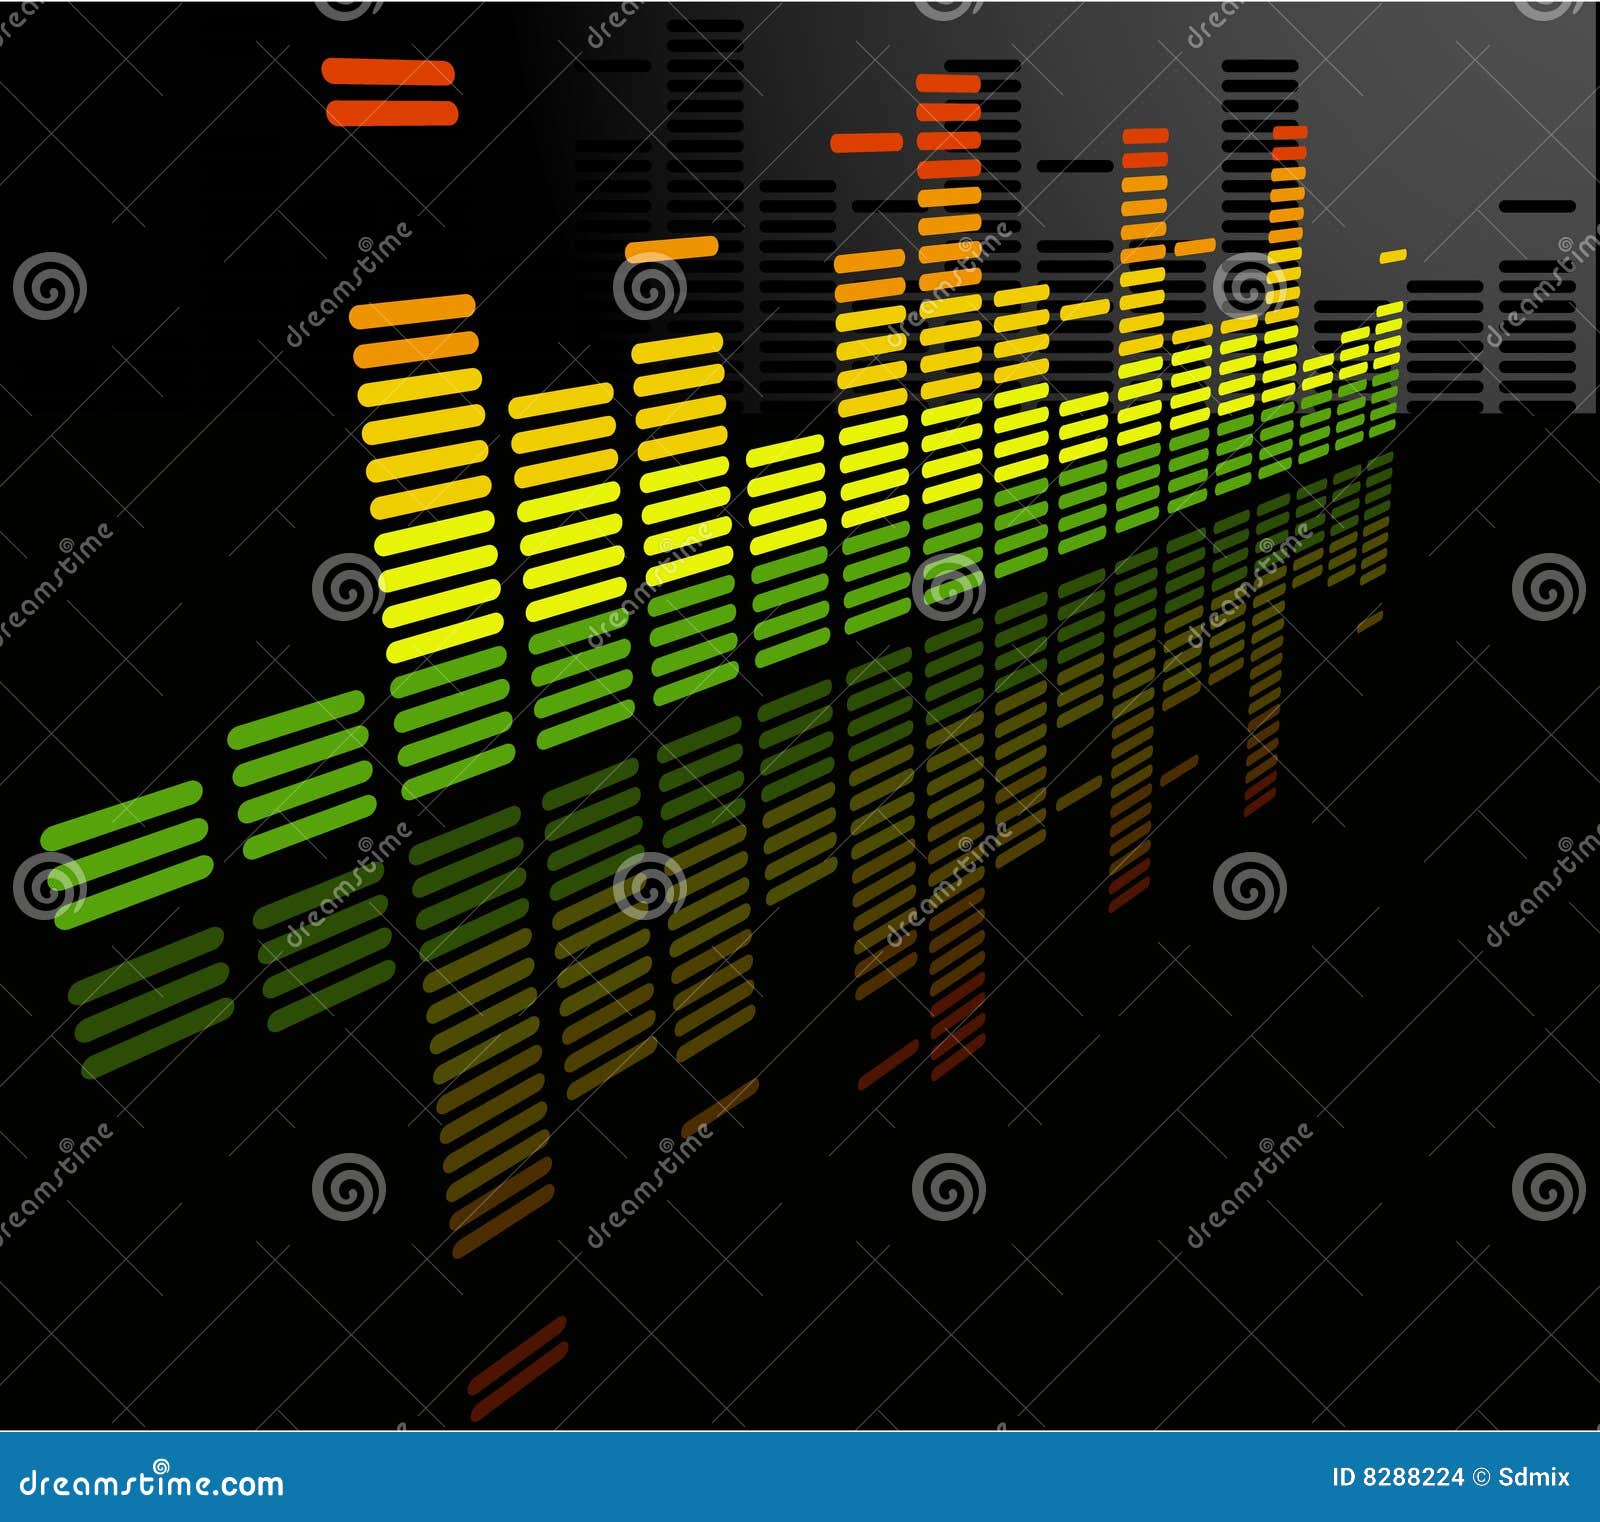 The Vector Equalizer Abstract Background Stock Vector - Illustration of ...